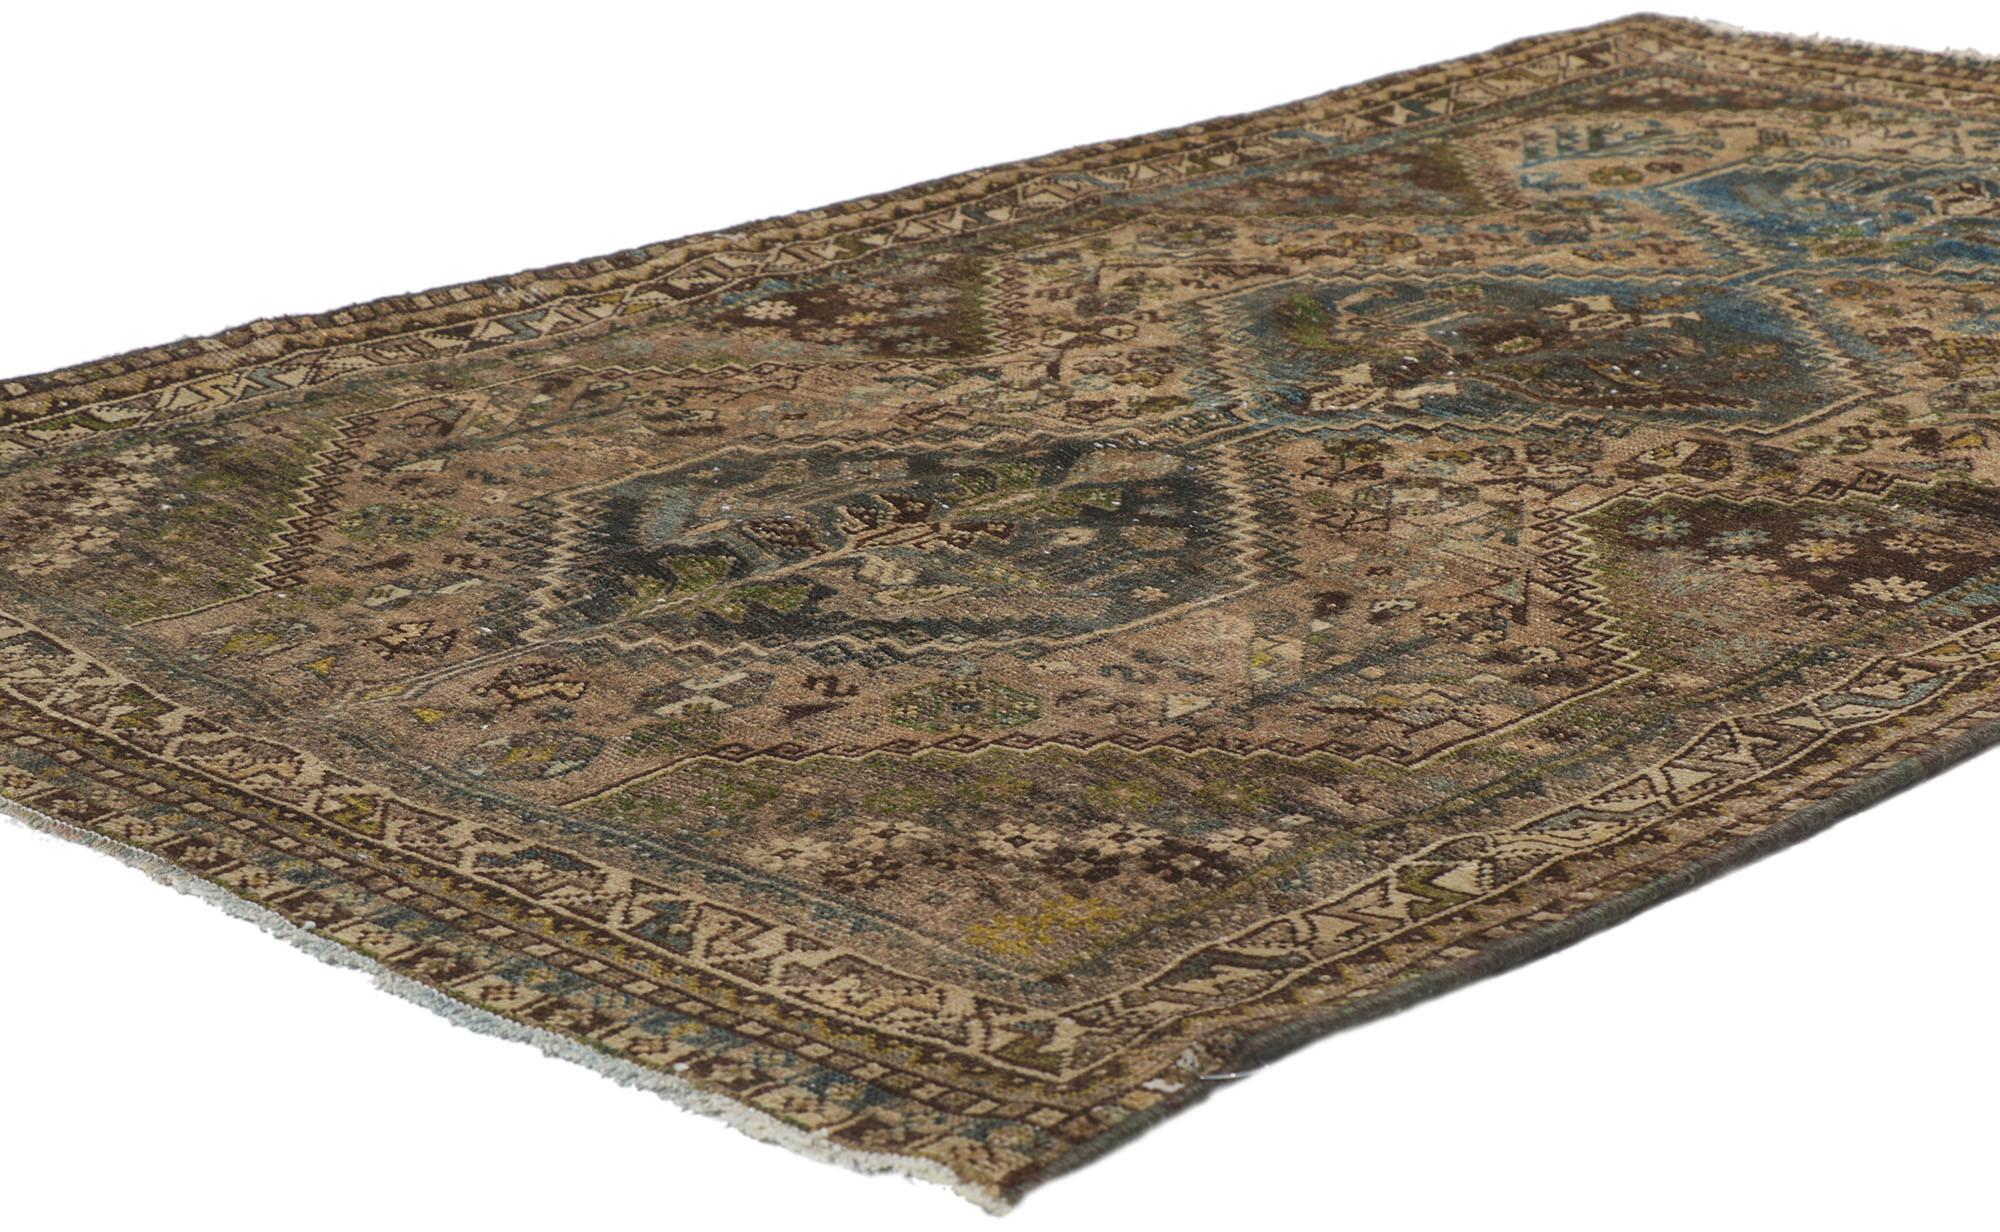 60995 Antique Persian Hamadan Rug,  03'06 x 05'05.
Prepare to be transported to a mystical realm of captivating wonder summoning visions of ancient tribal enchantments with this hand knotted wool antique Persian Hamadan rug appearing as your magic